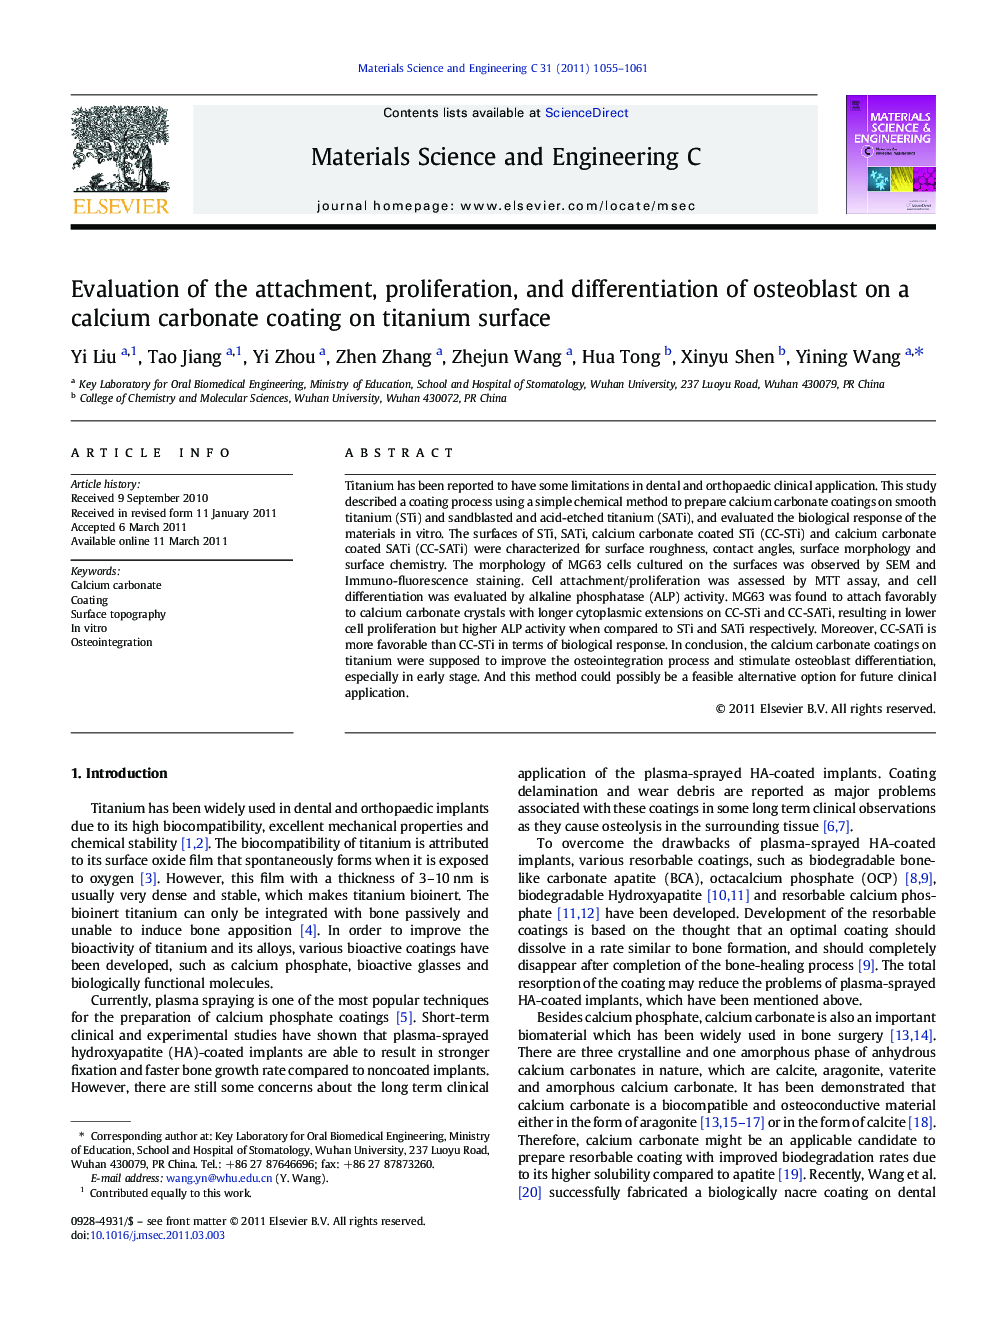 Evaluation of the attachment, proliferation, and differentiation of osteoblast on a calcium carbonate coating on titanium surface